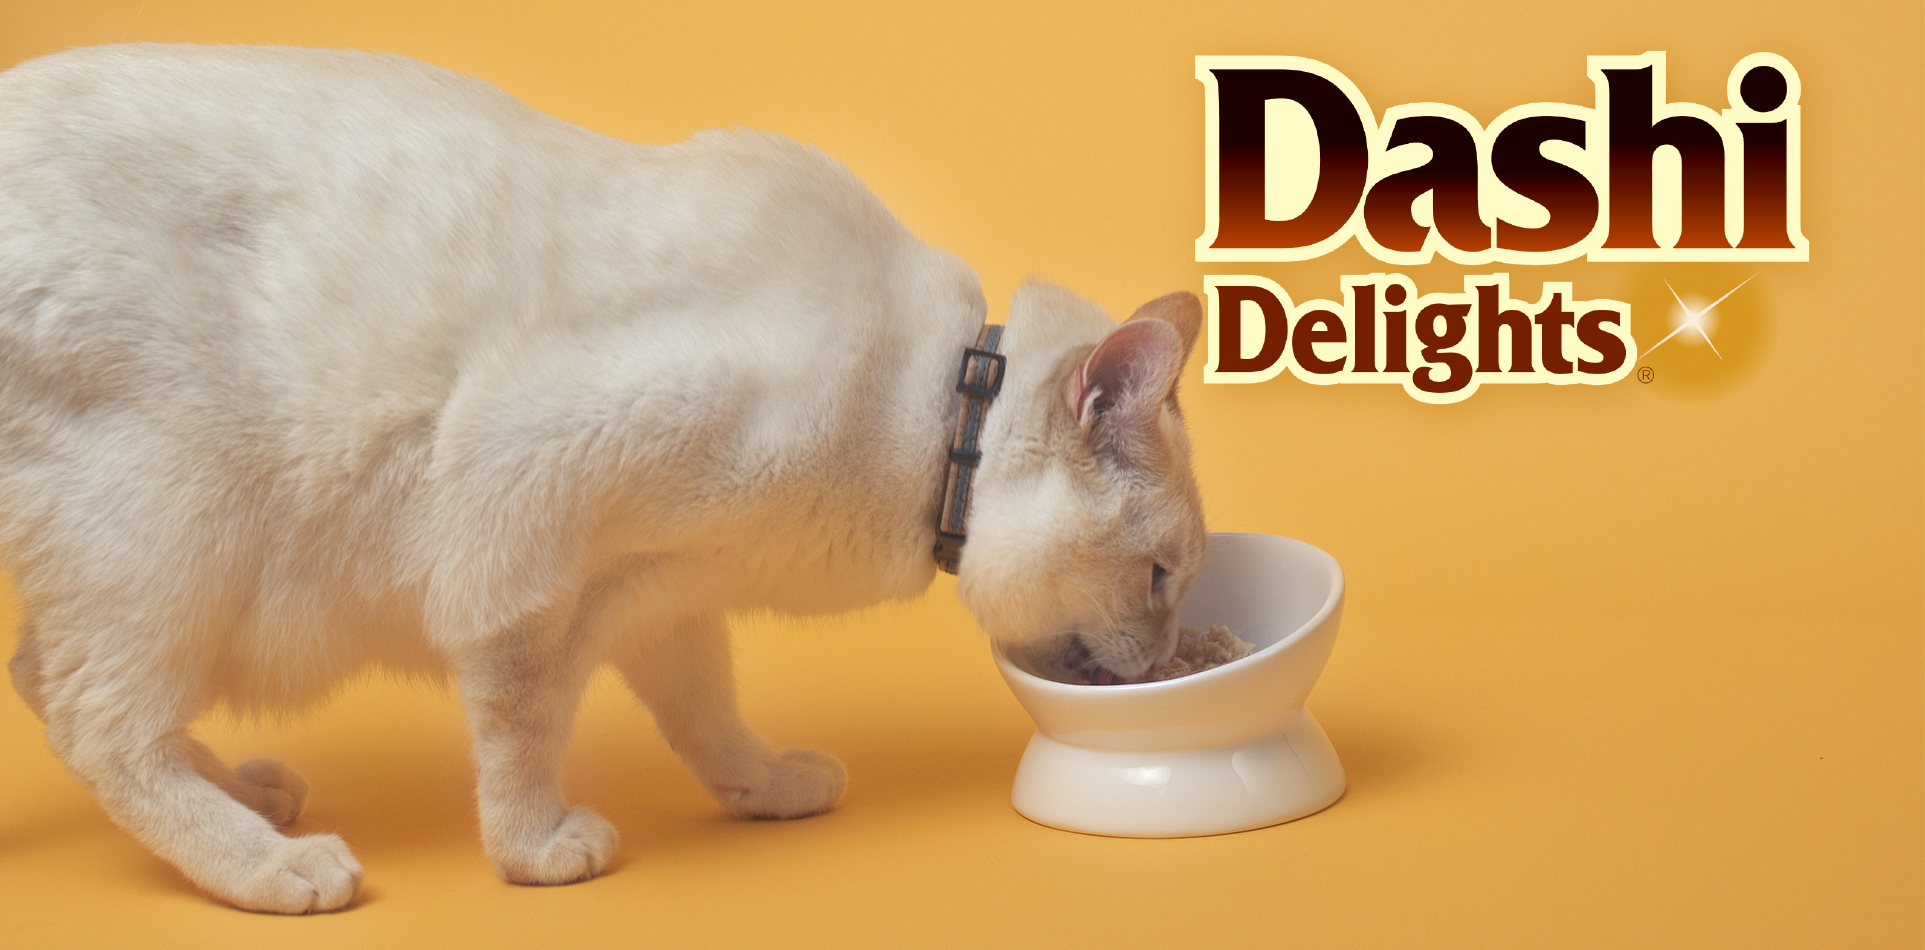 White cat eating Dashi Delights in a raised white bowl